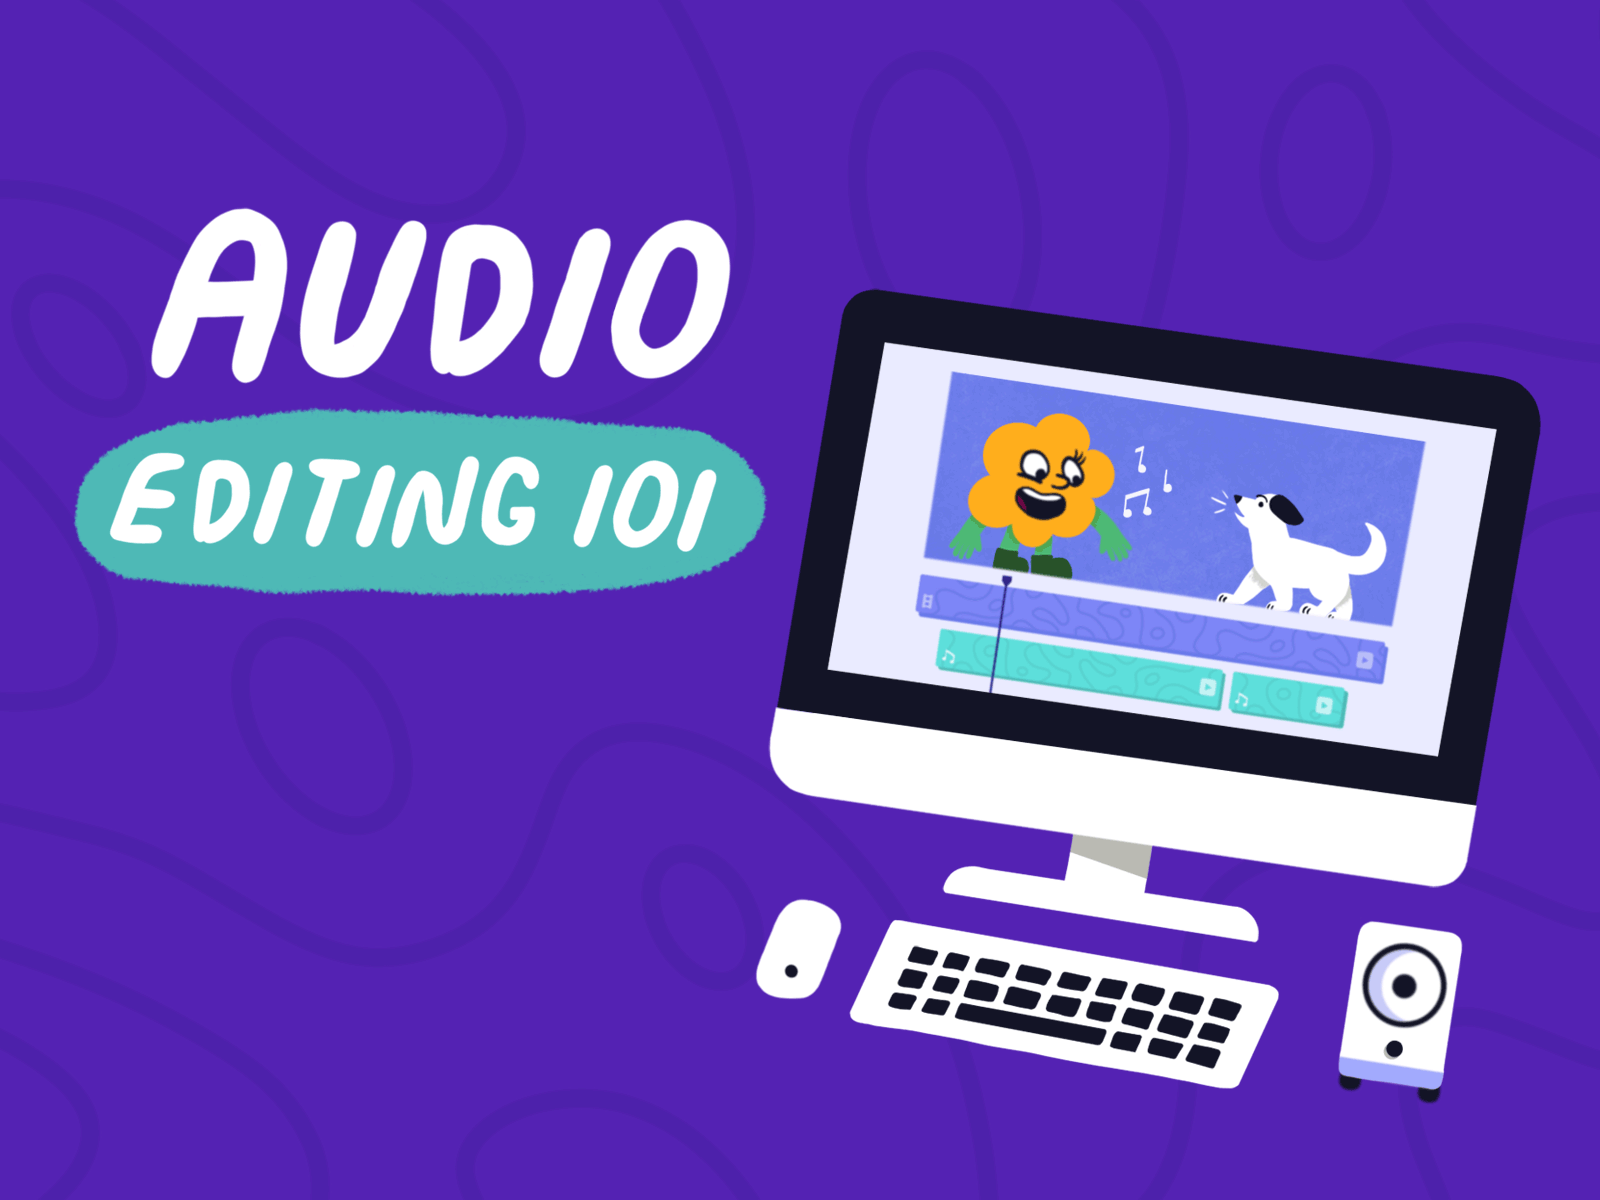 Skillshare: Audio Editing for Beginners in Photoshop adobe photoshop animated animation audio audio editing class howto illustration learn animation learning motion design motion graphics new class online learning skillshare skillshare class sound sound effects tutorial video editing